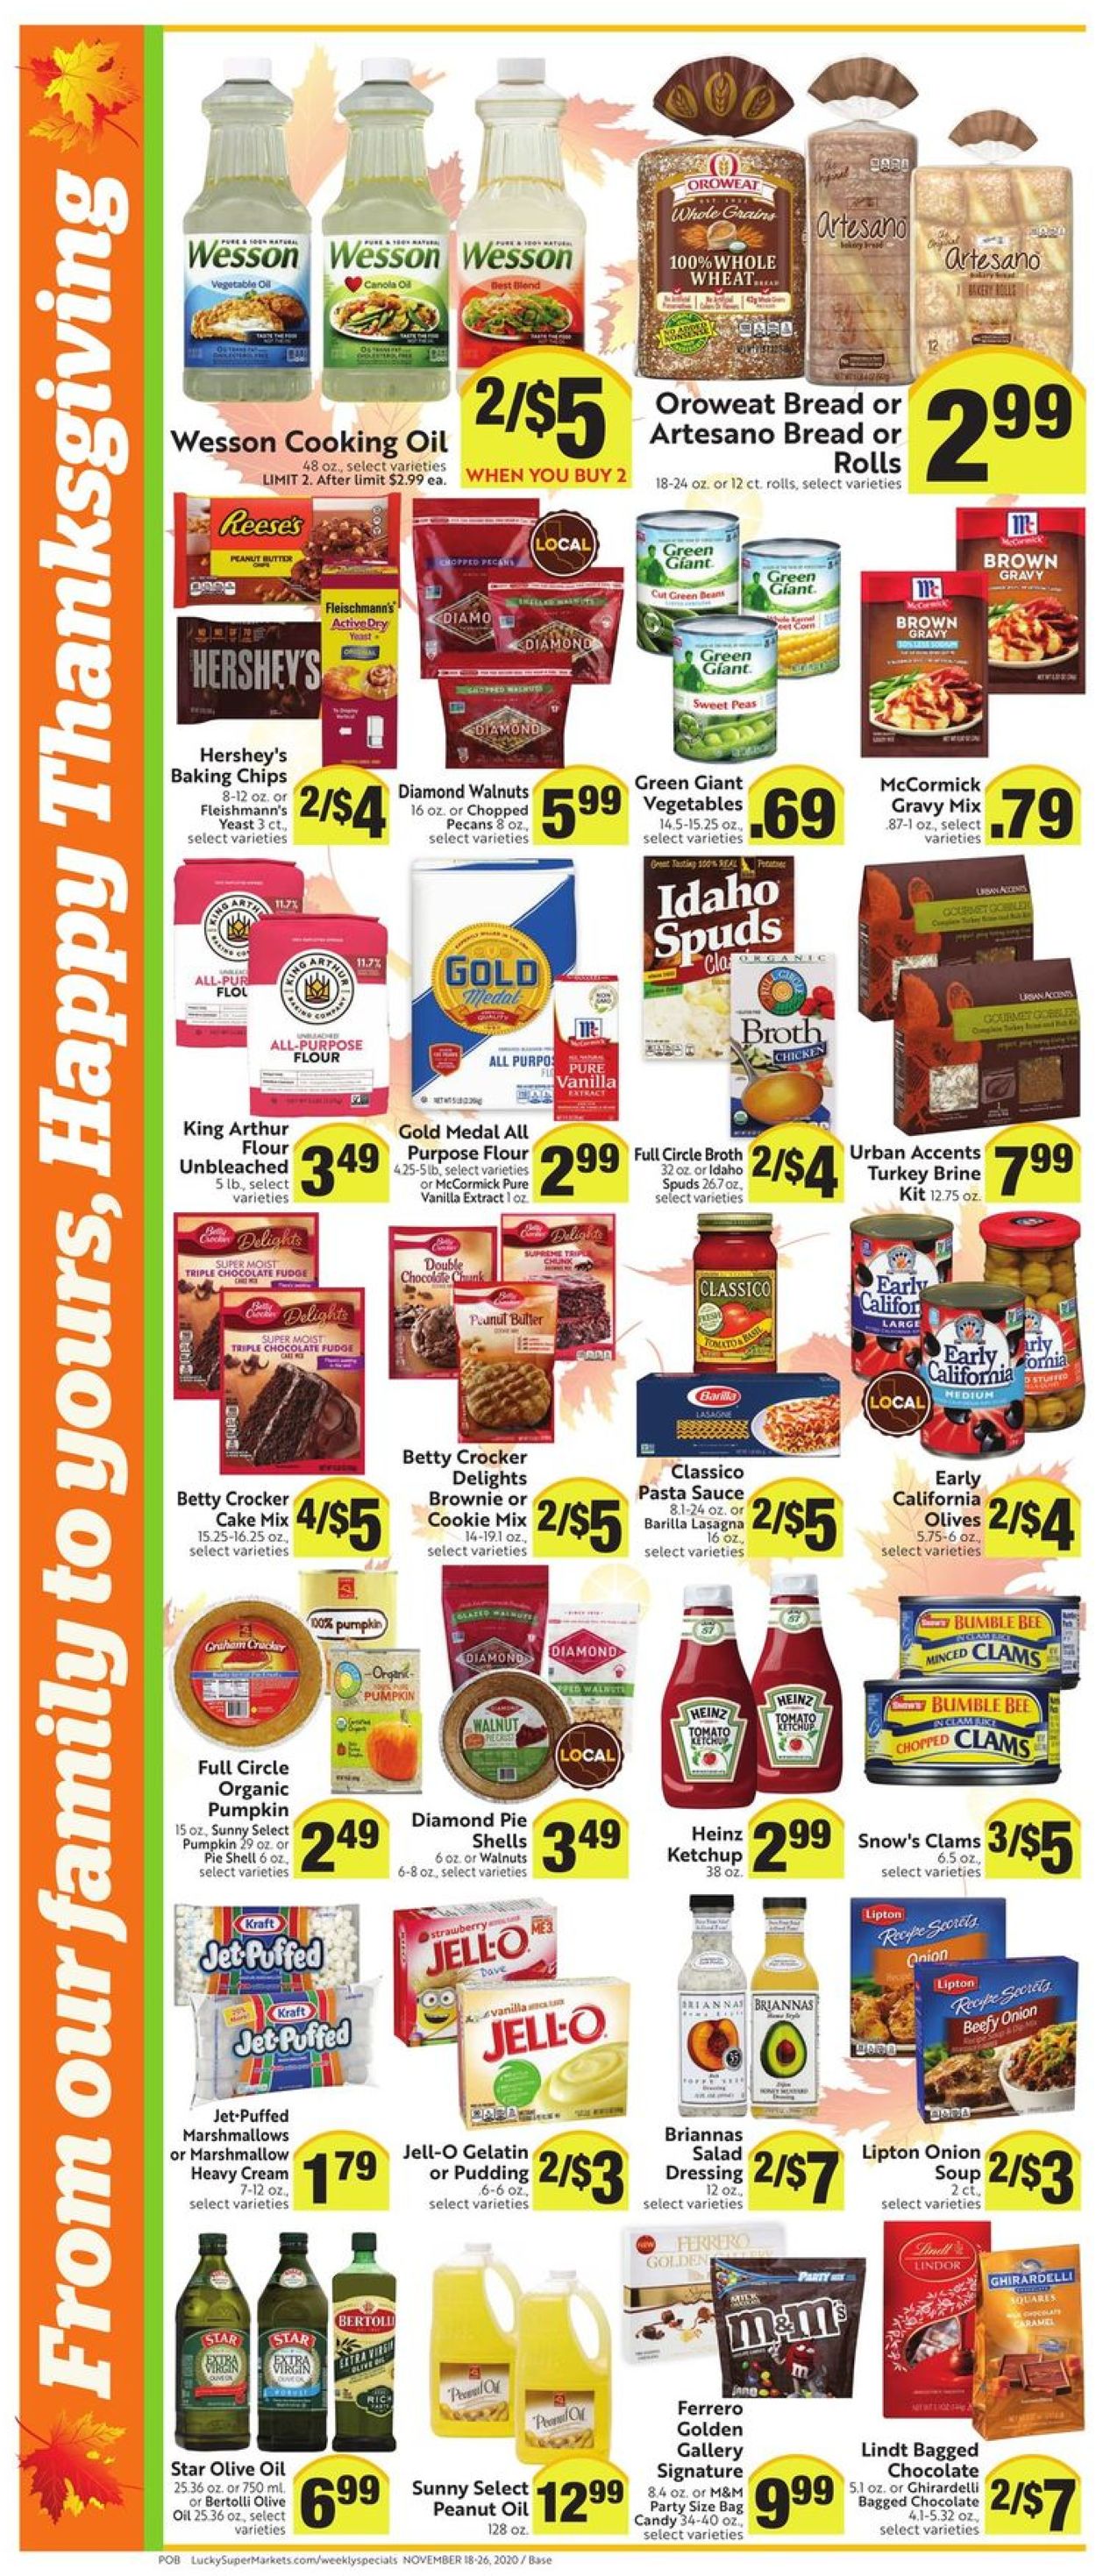 Lucky Supermarkets Thanksgiving ad 2020 Weekly Ad Circular - valid 11/18-11/26/2020 (Page 4)